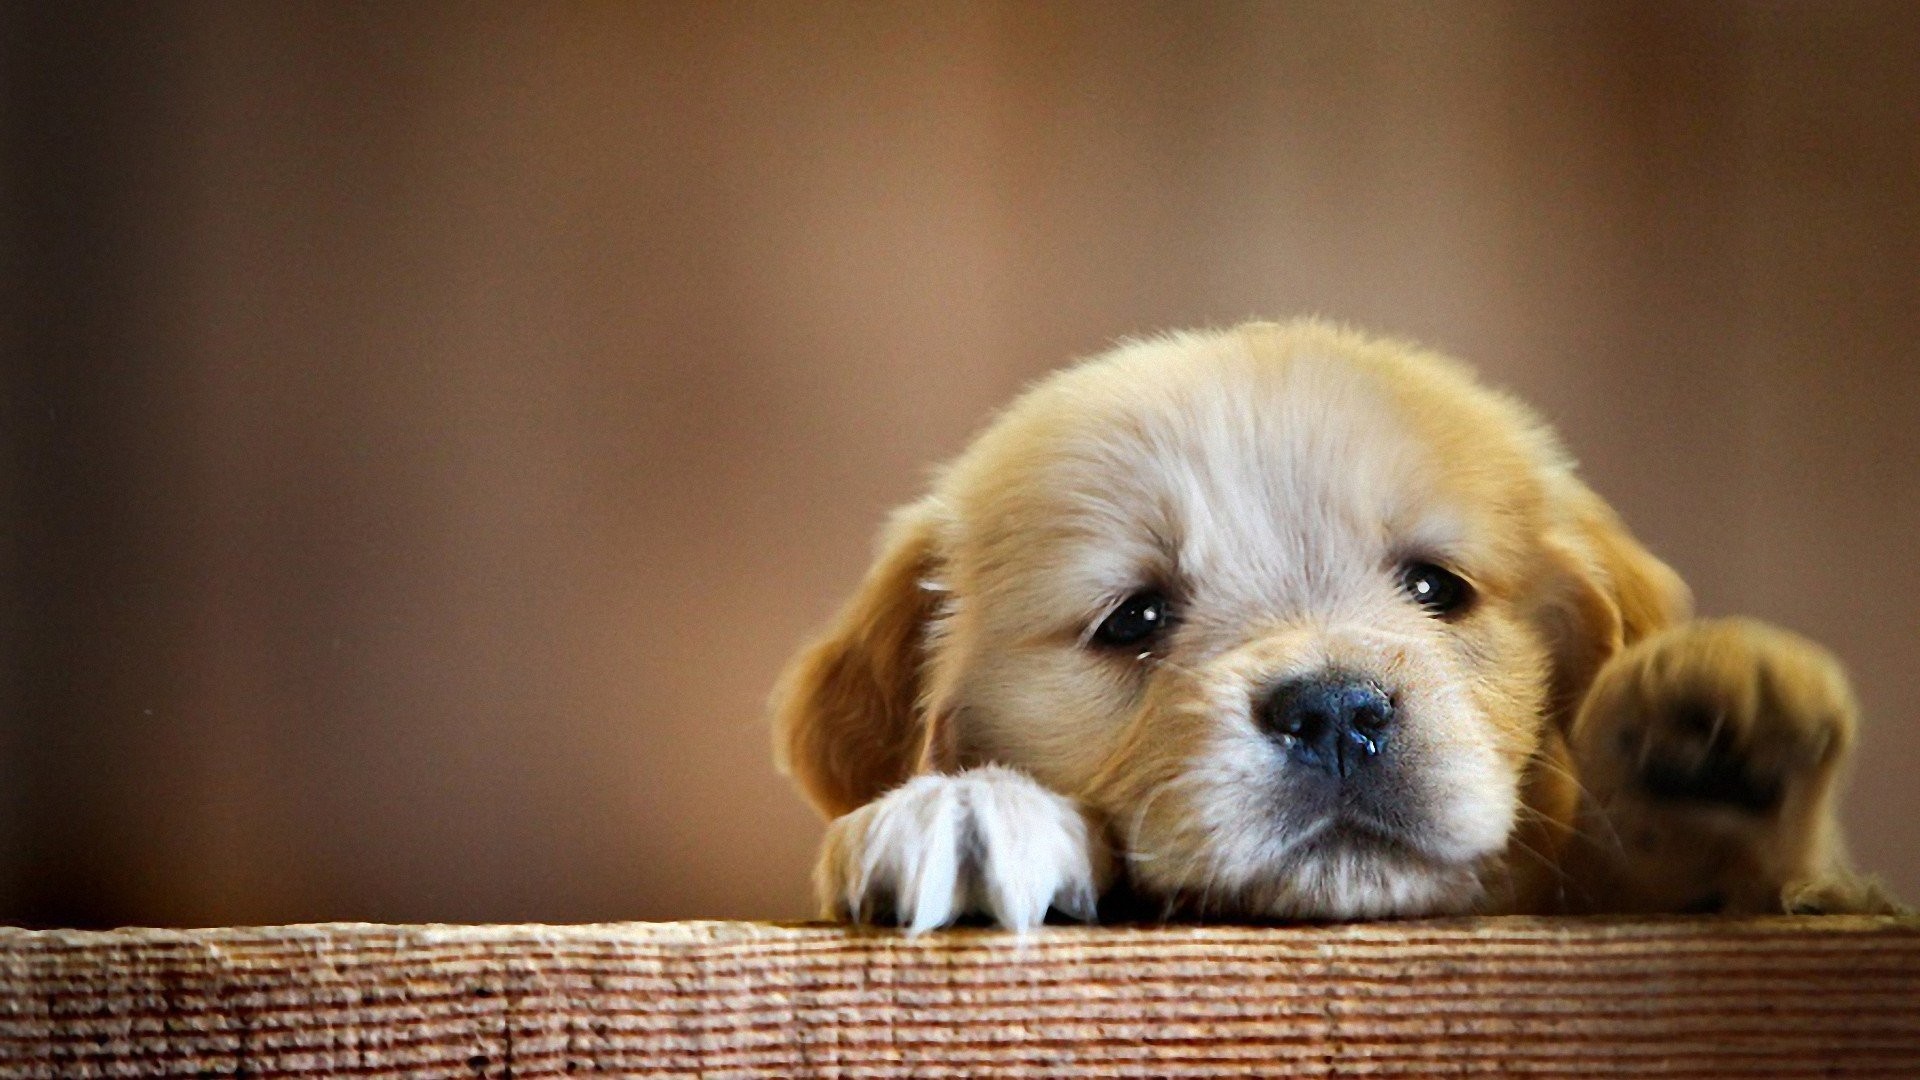 1920x1080 Puppy want to play animal cute baby dog wallpaper |  | 818120 |  WallpaperUP